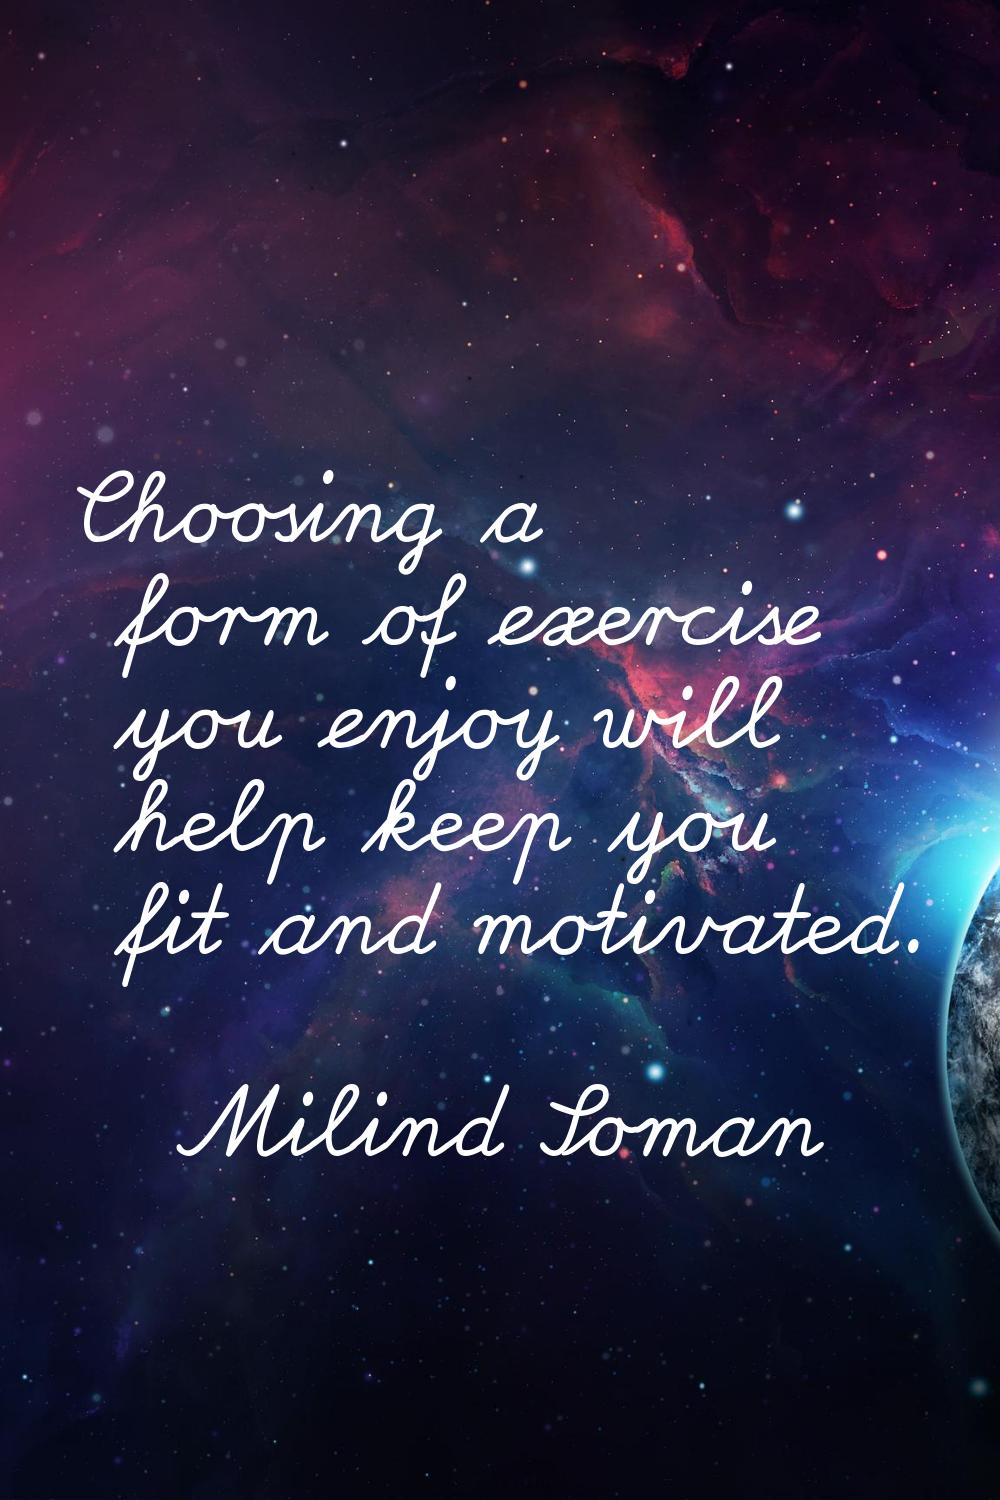 Choosing a form of exercise you enjoy will help keep you fit and motivated.